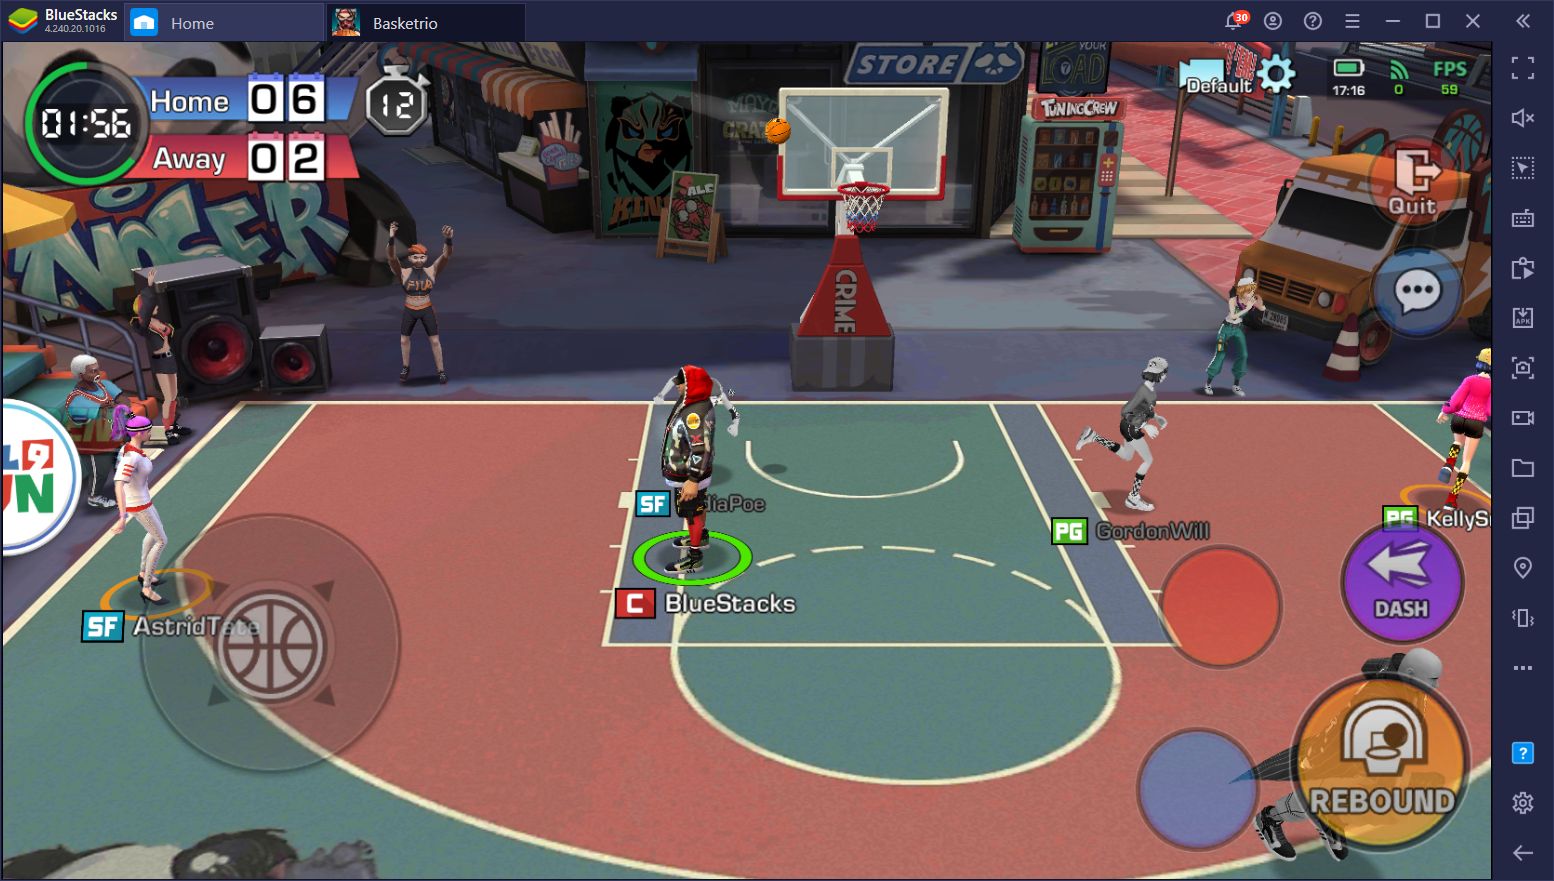 Basketrio on PC - The Best Beginner Tips and Tricks for this New Mobile Basketball Game